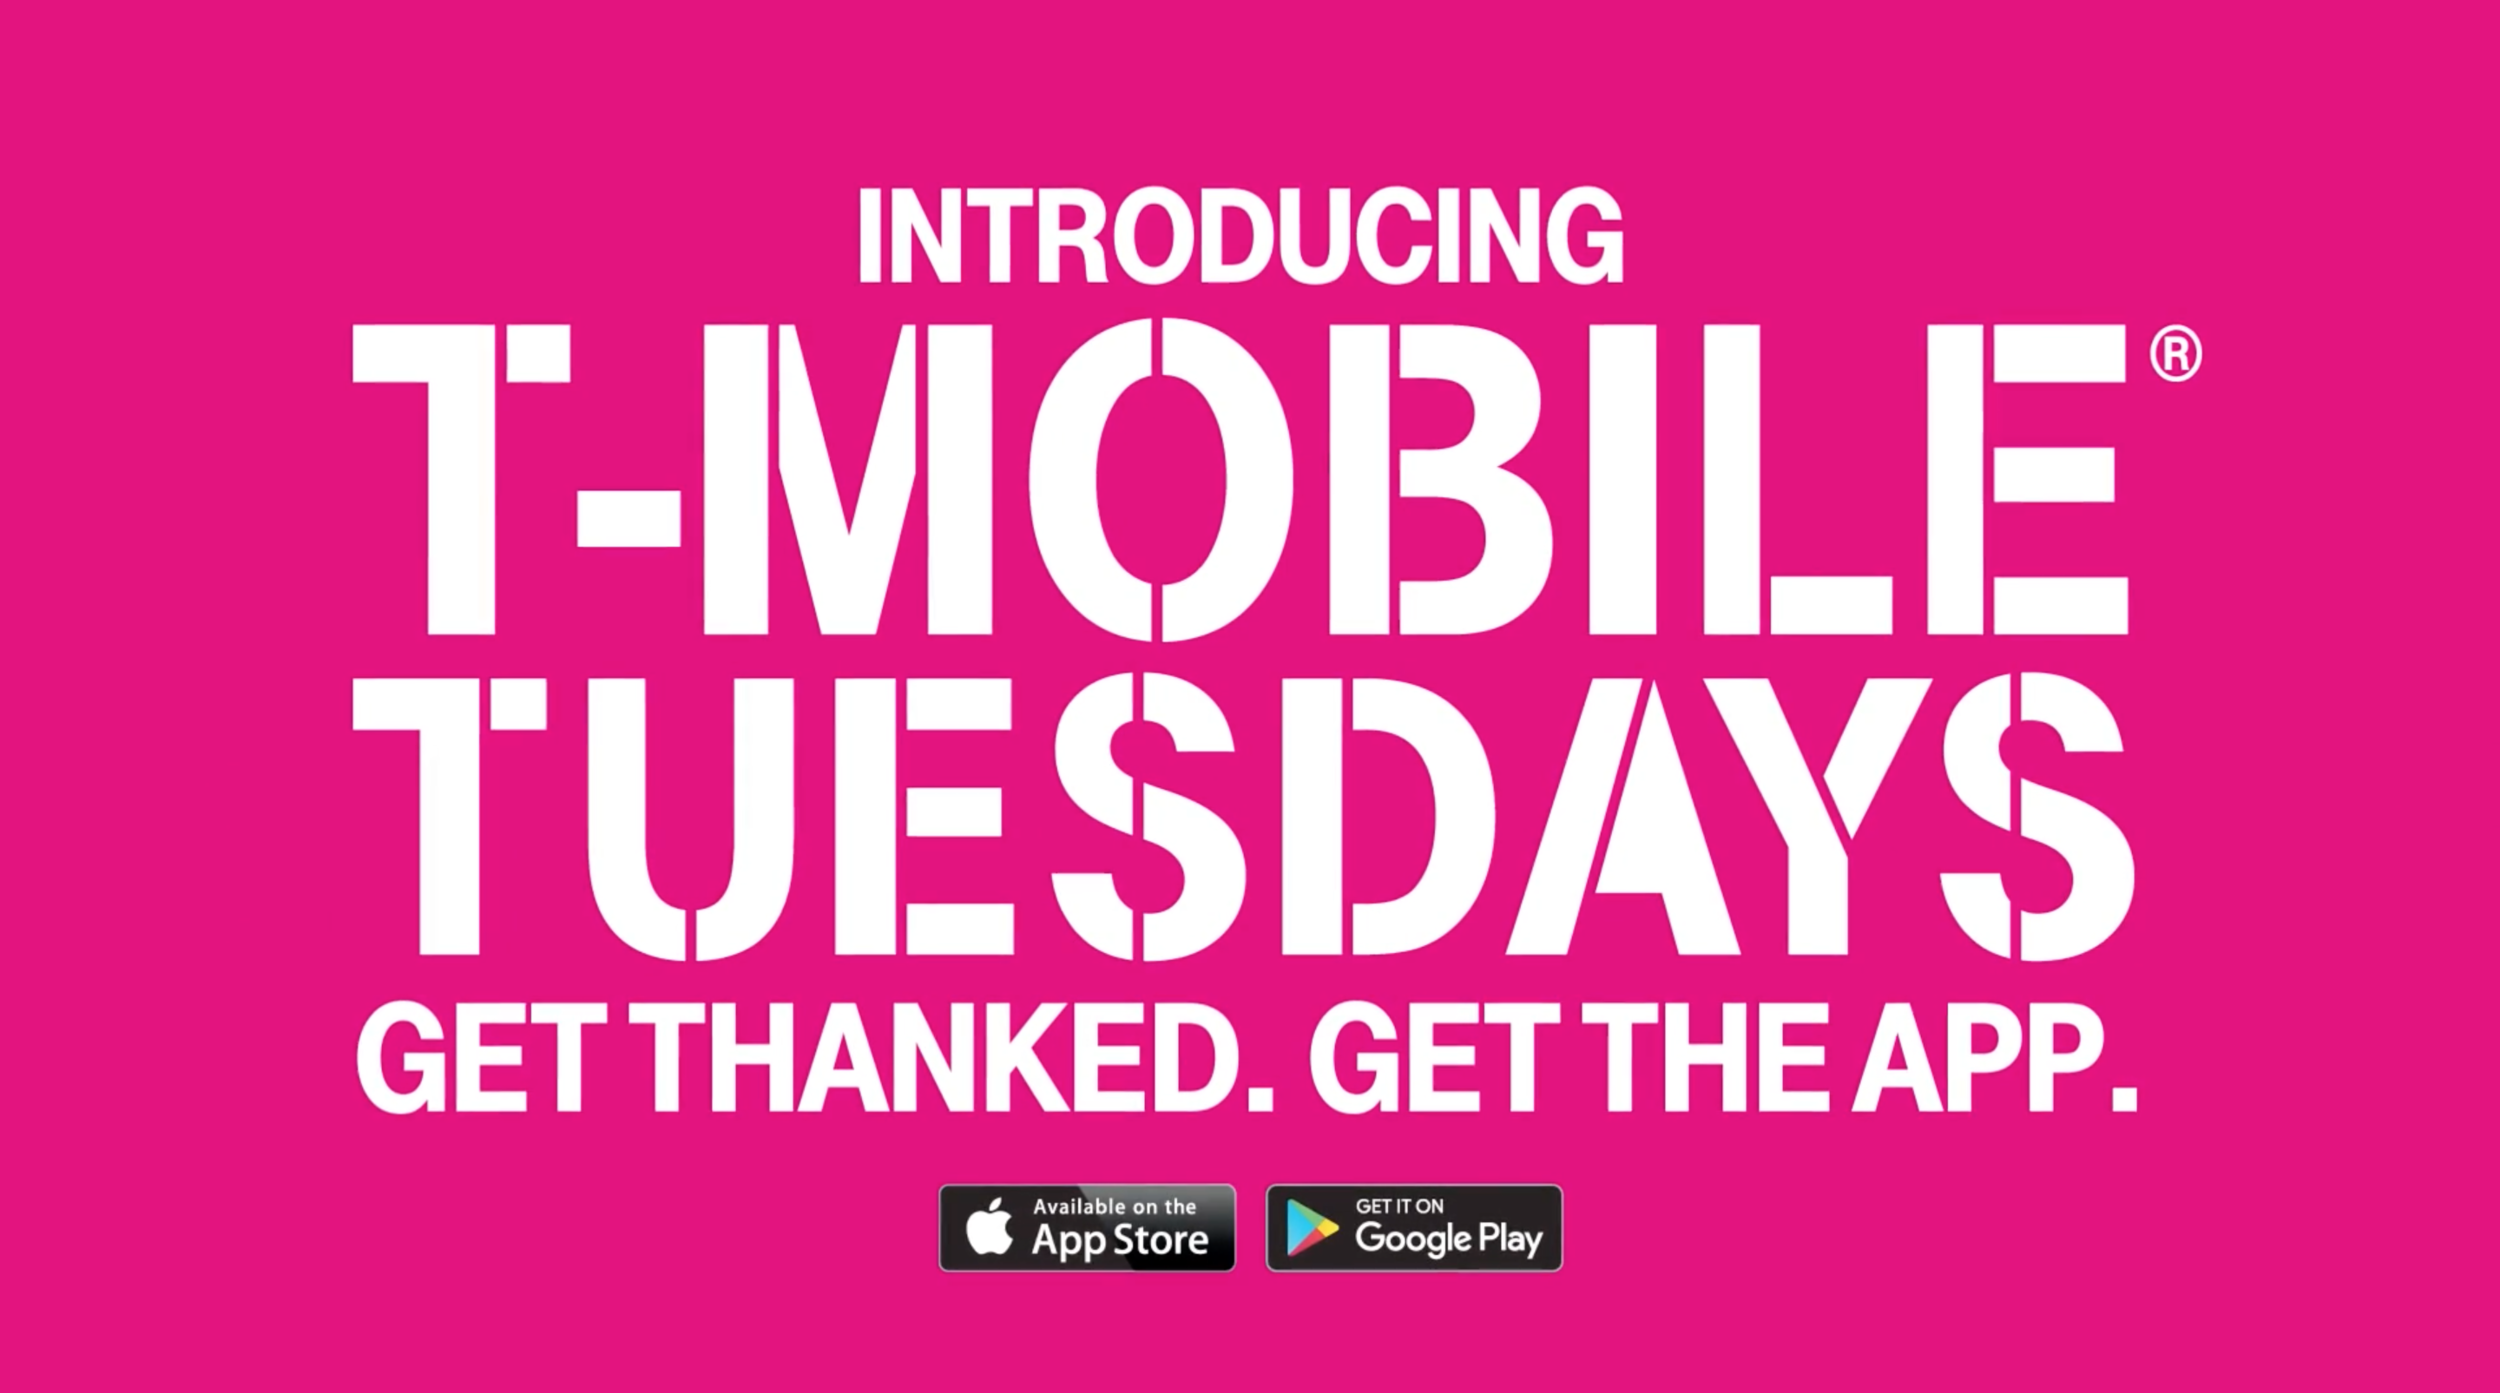 T-mobile_Tuesdays_CodyKussoy_01.png